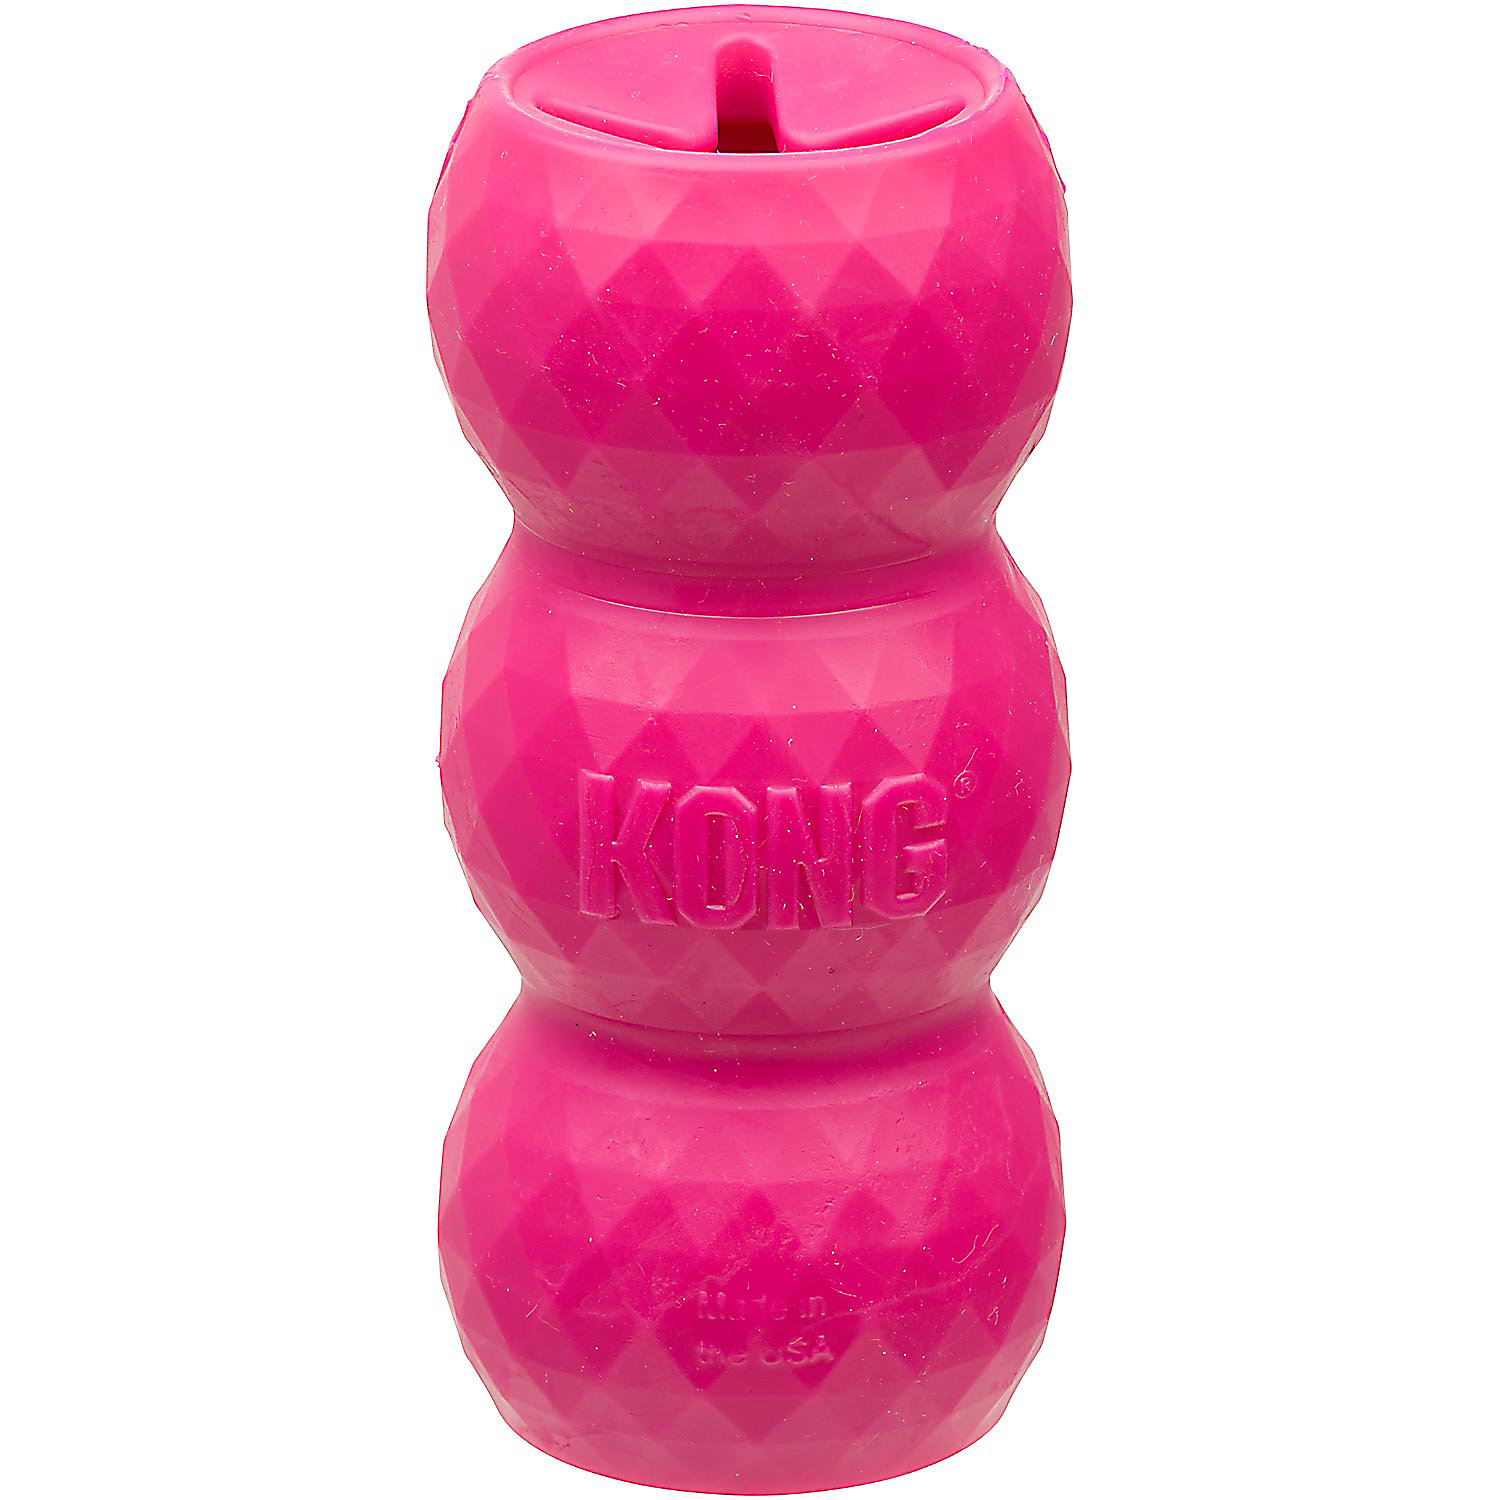 KONG Genius Mike Dog Toy, Large, Assorted